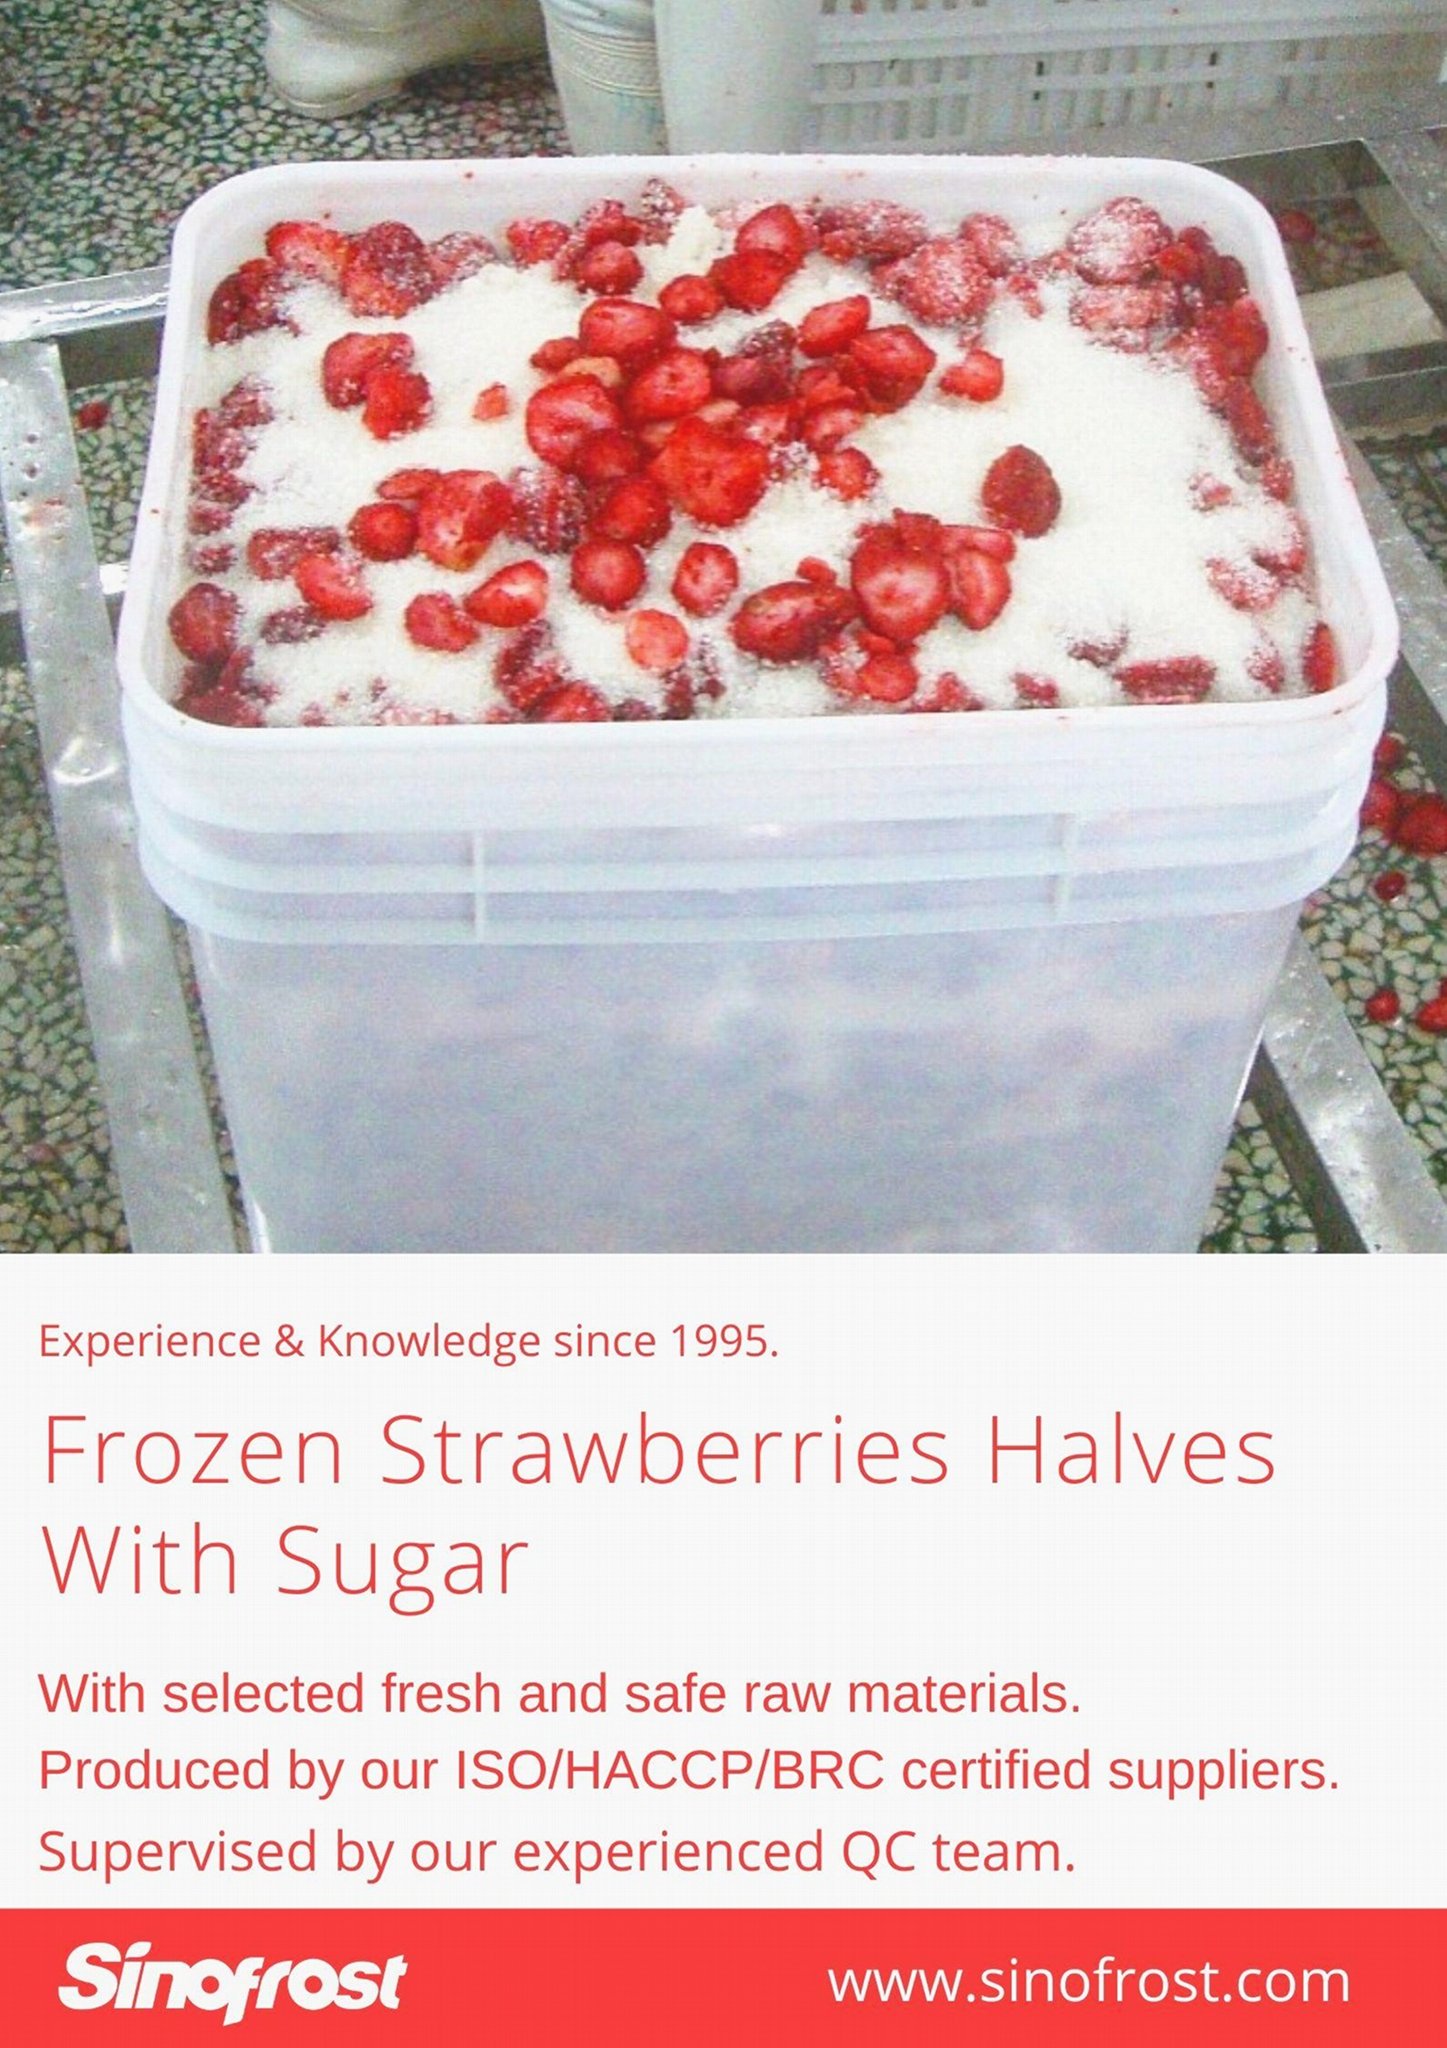 IQF Strawberries,Frozen Whole Strawberries,IQF Strawberry,American no.13 variety 13